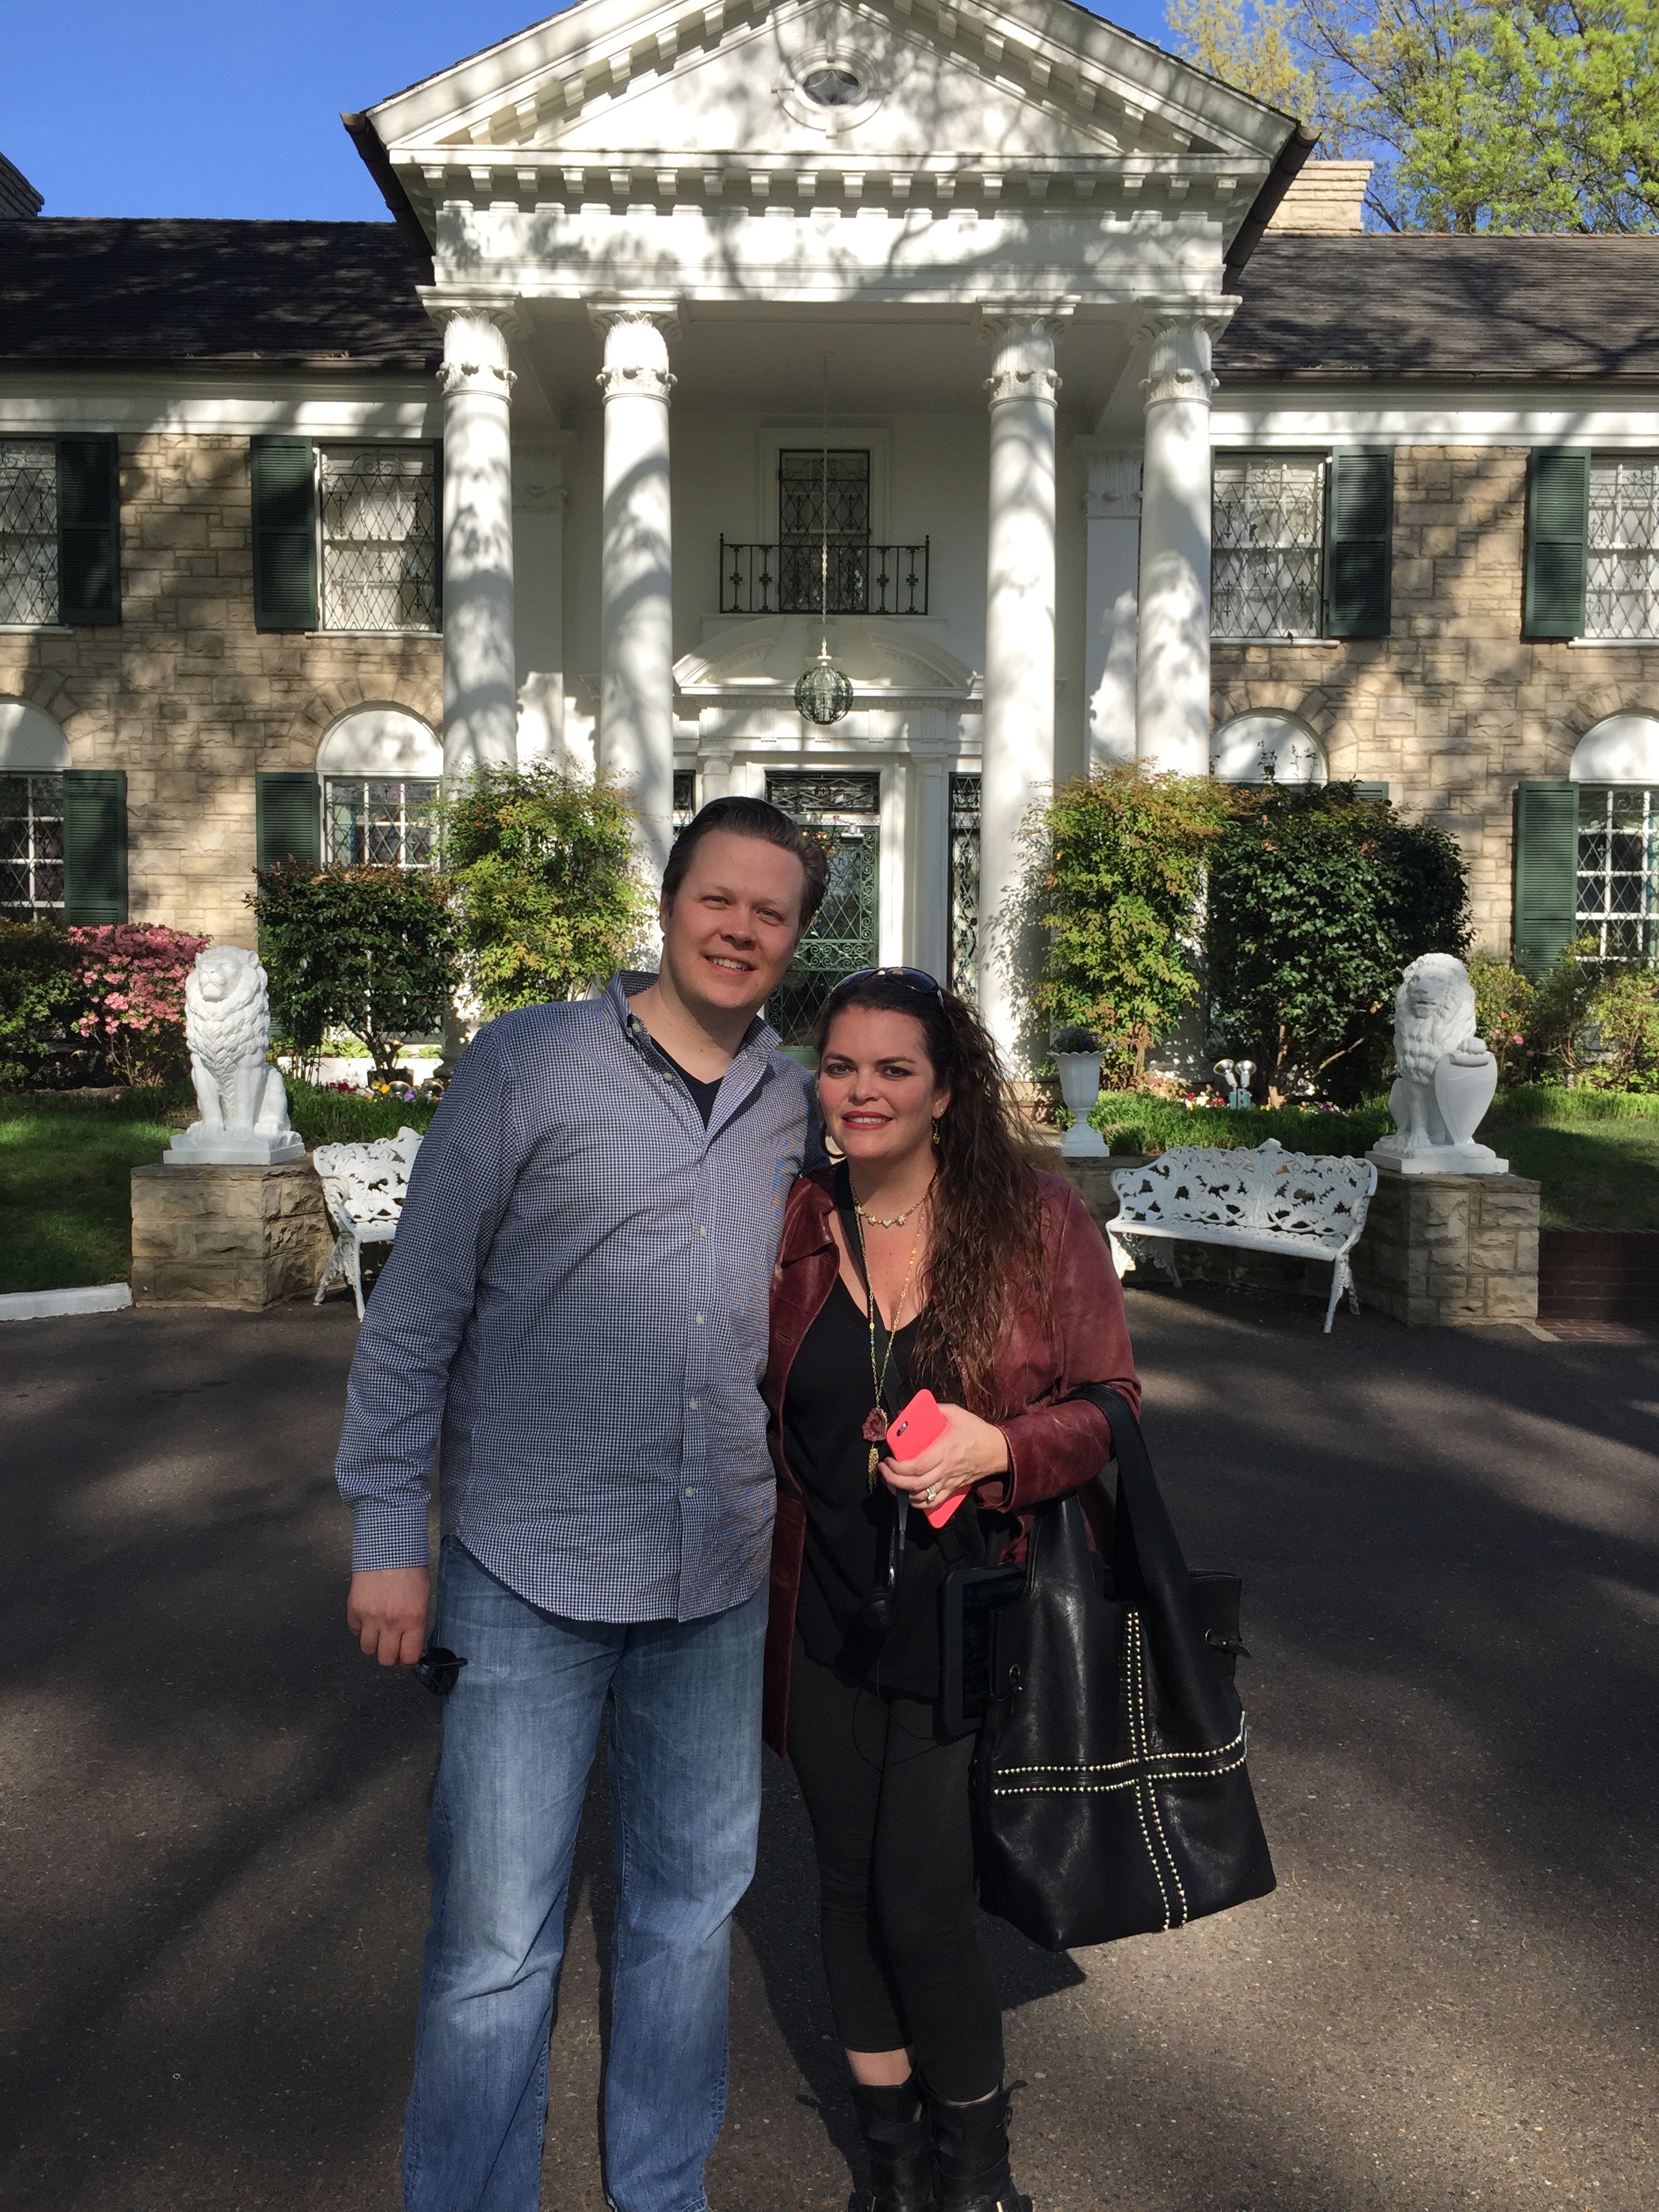 Visiting Graceland with my friend Vanessa as part of my visit to my 50th state.